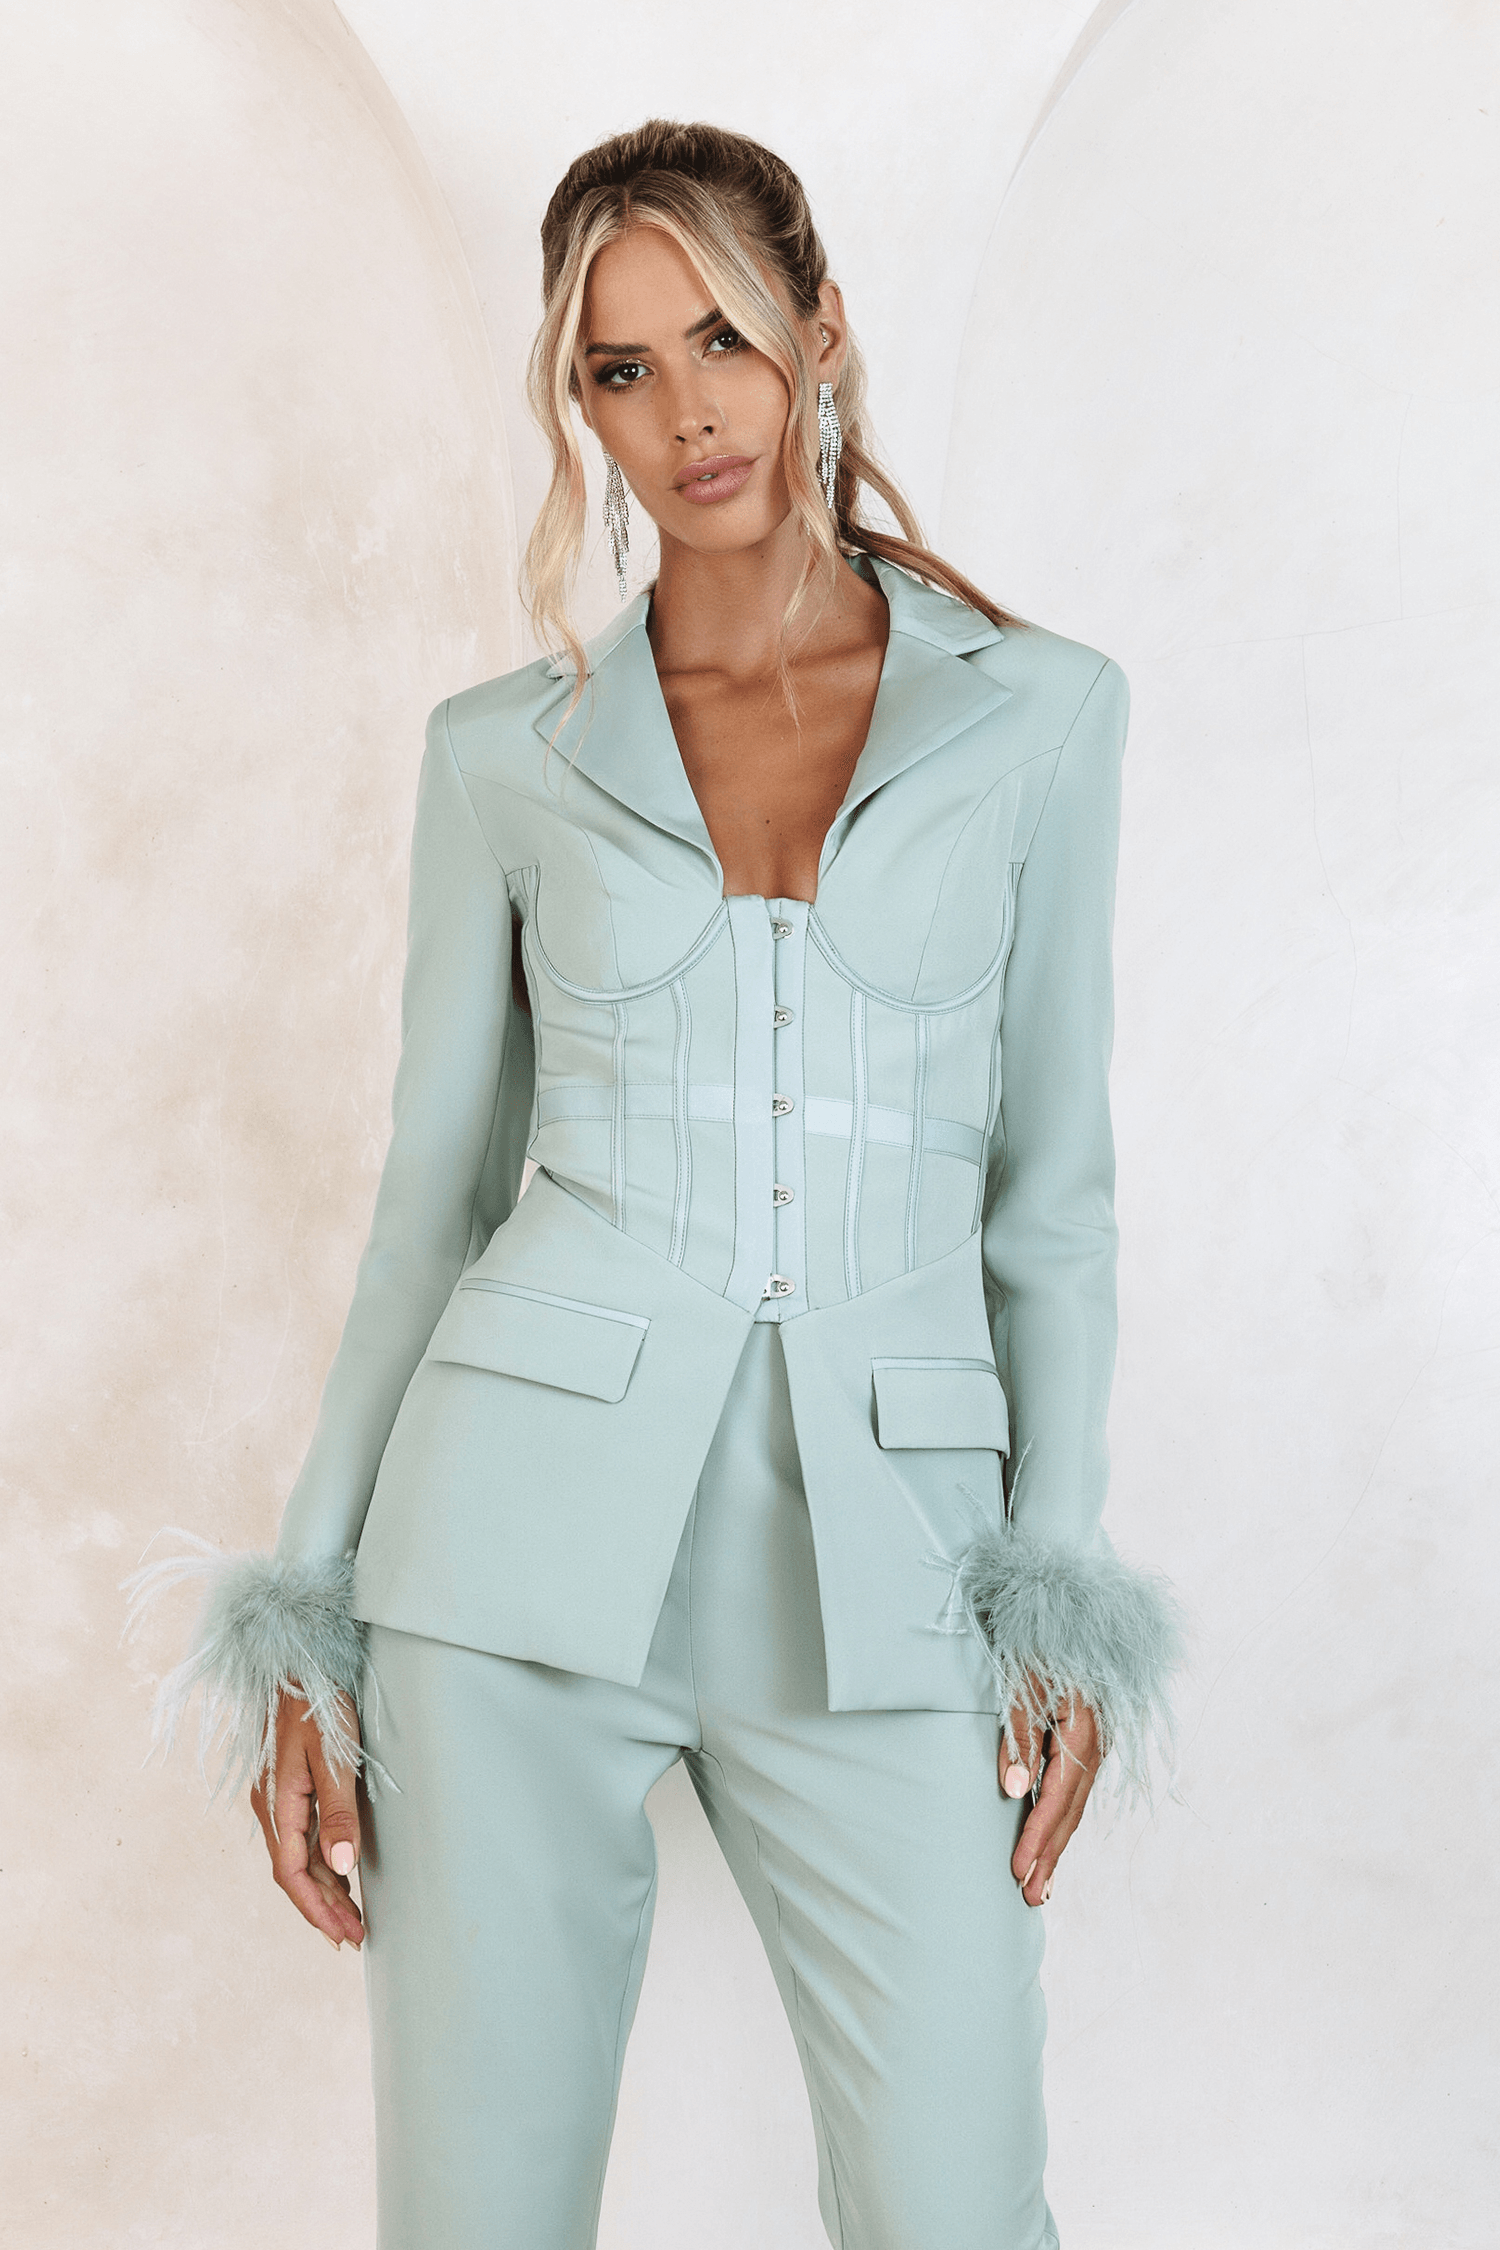 ISABELLA Corset Jacket With Feather Trim In Sage Green - Lavish Alice